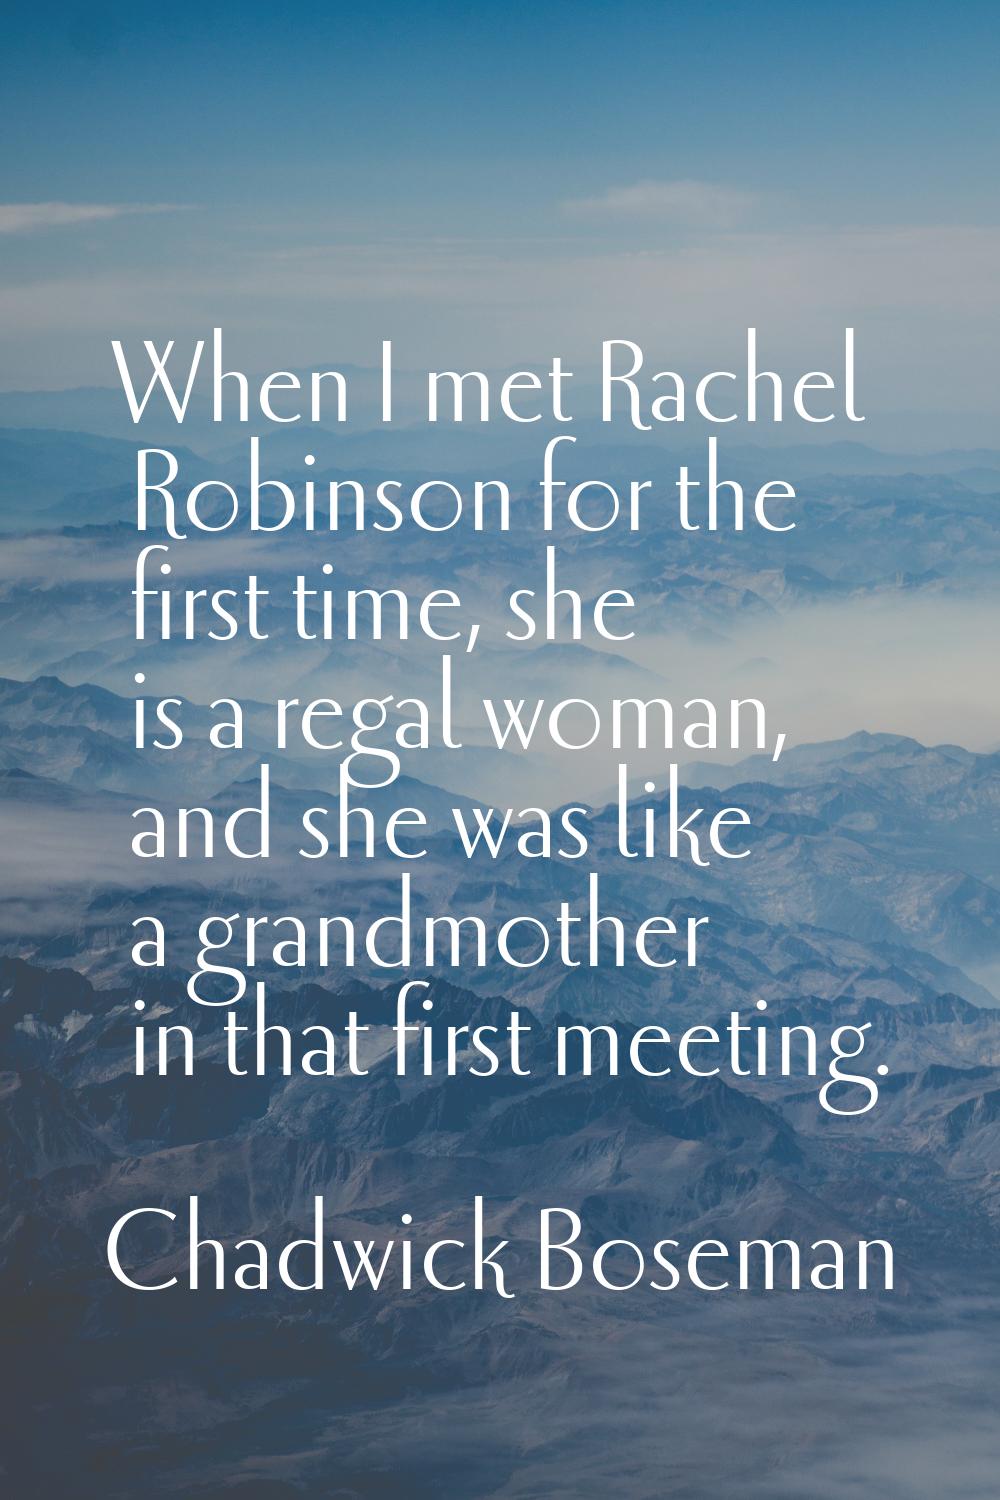 When I met Rachel Robinson for the first time, she is a regal woman, and she was like a grandmother